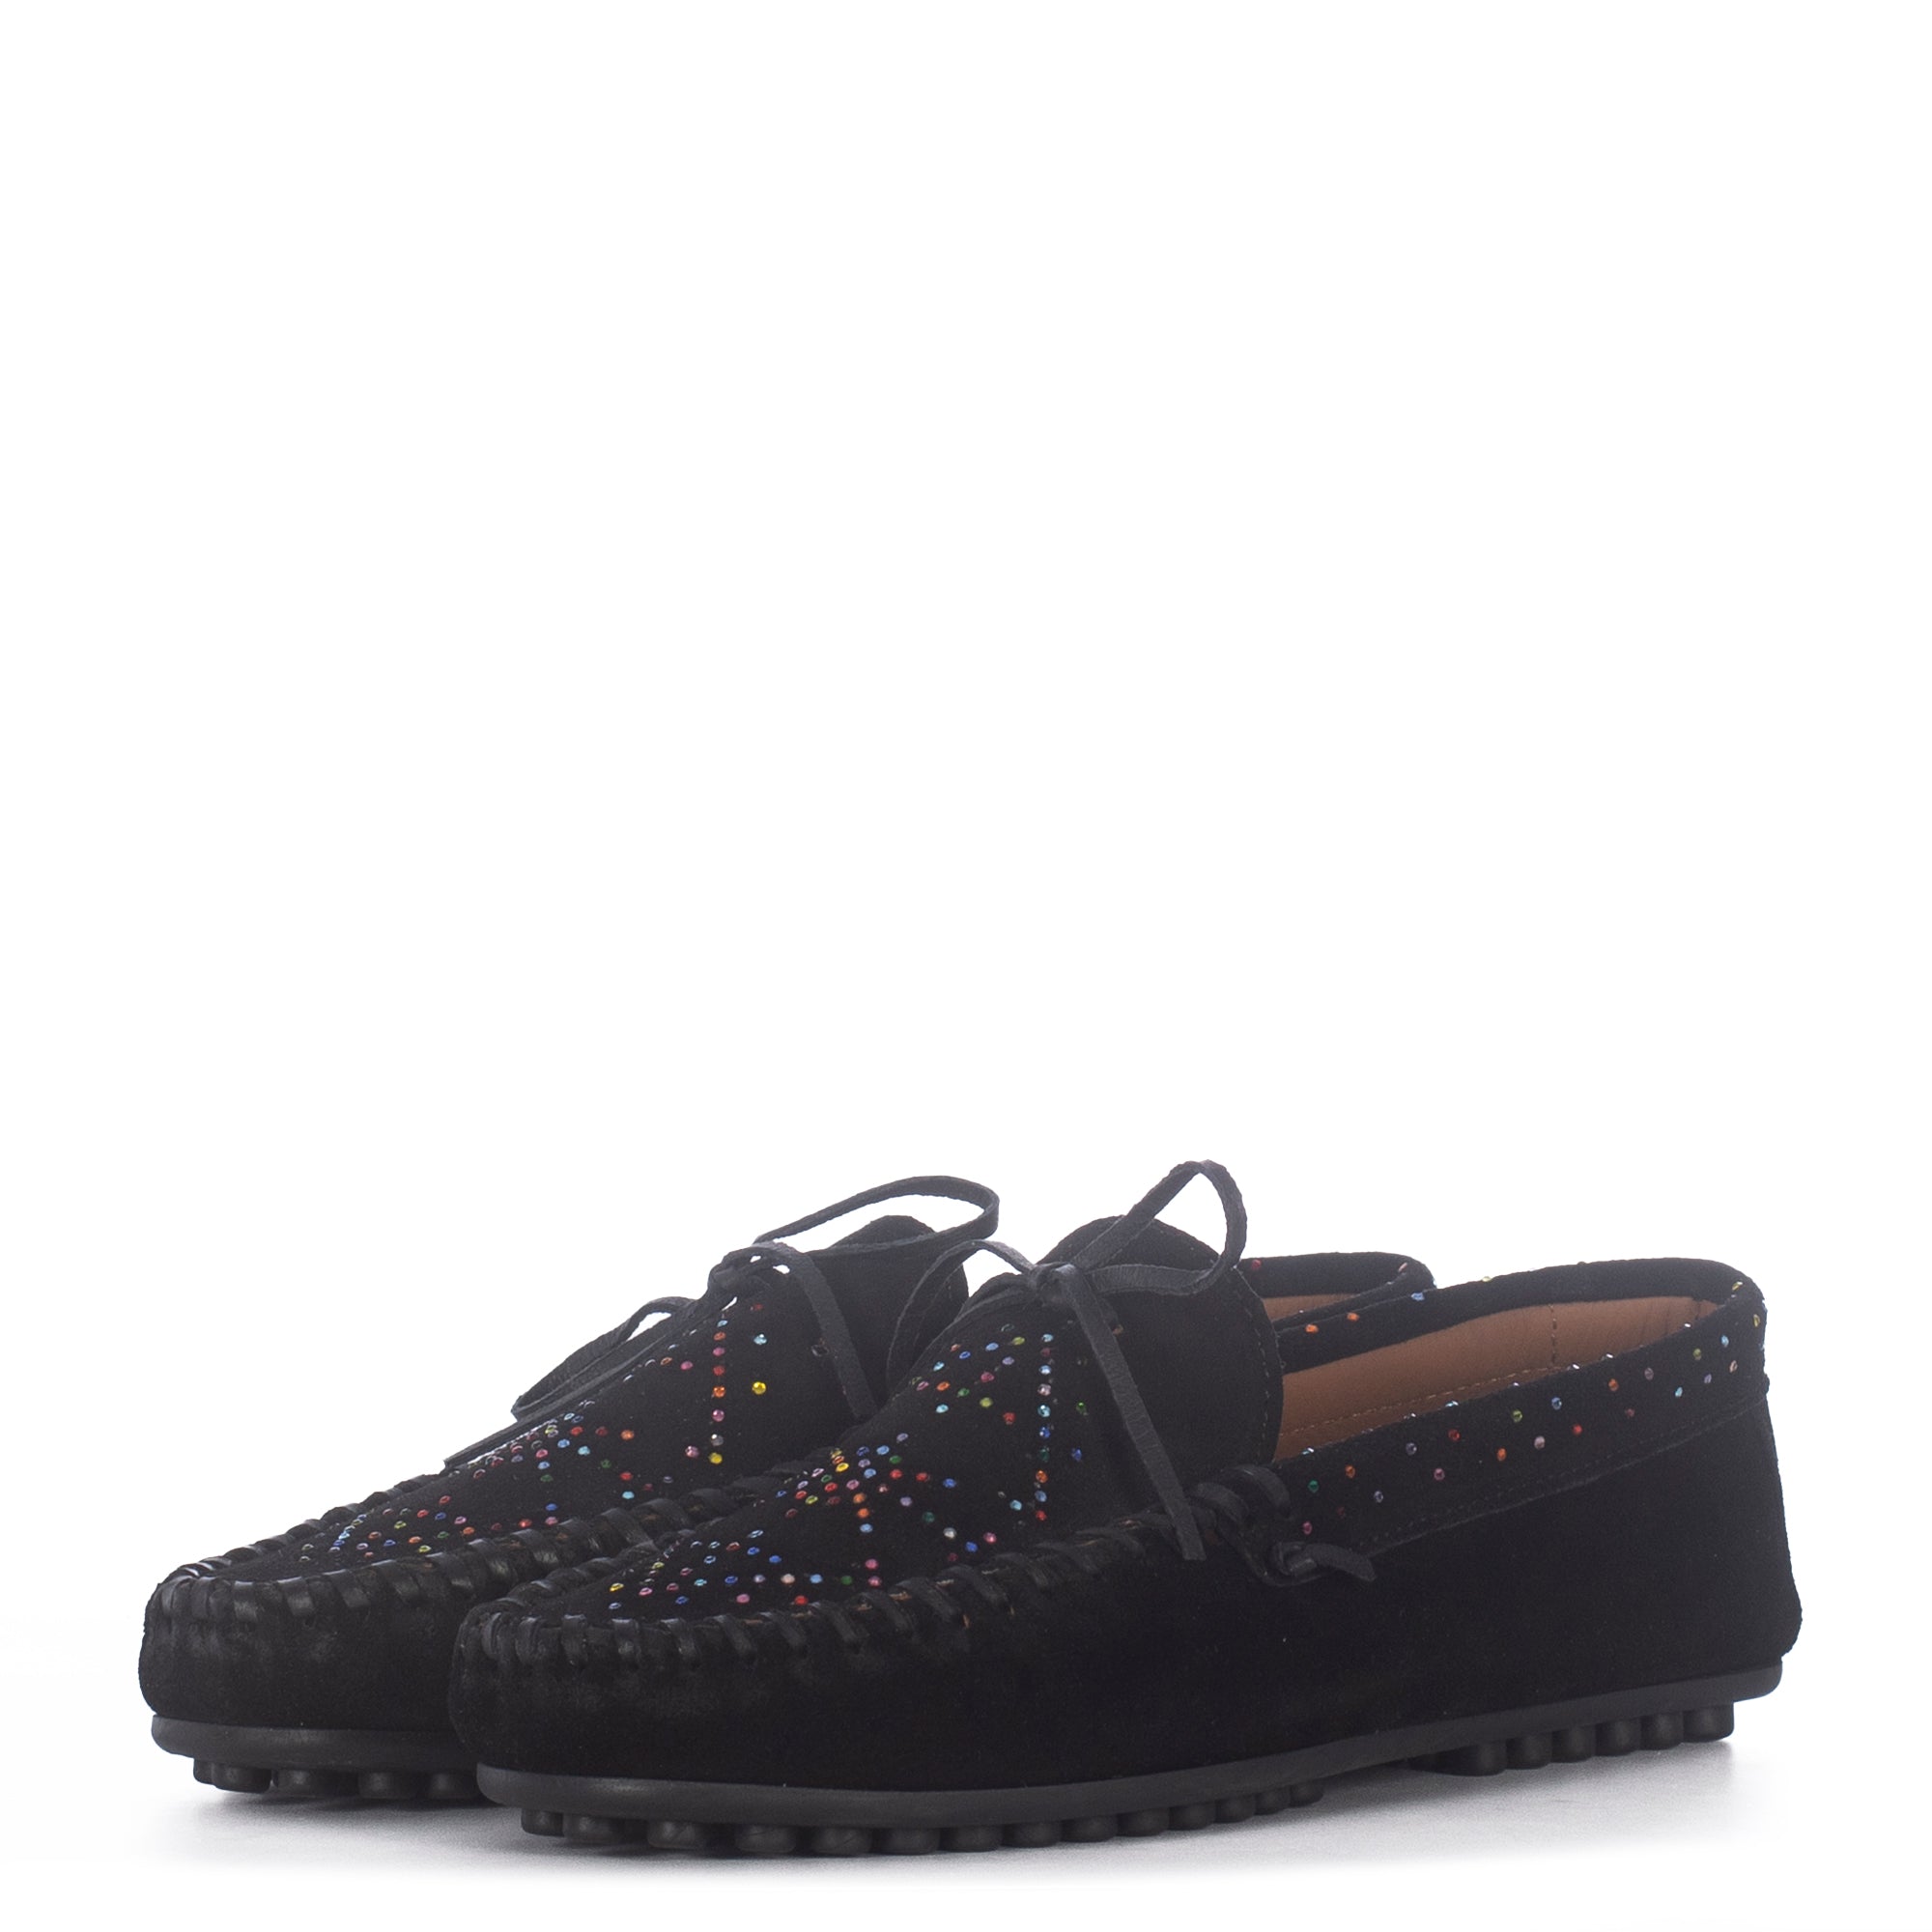 QUECHUA BLACK LOAFERS MULTICOLORED STRASS